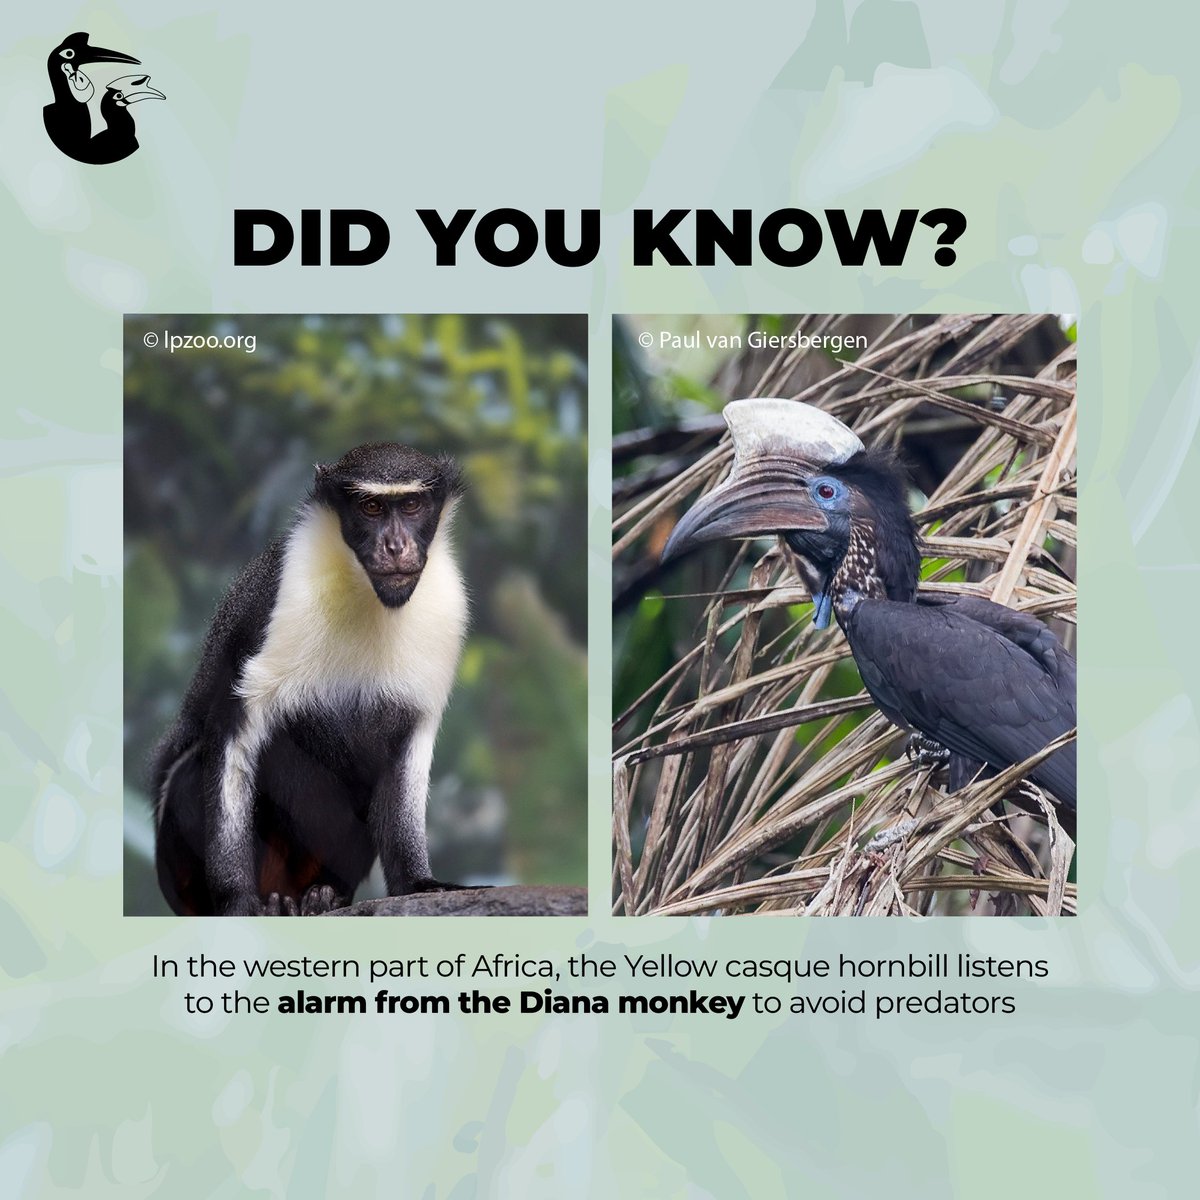 The Diana monkey (Cercopithecus diana) has a unique behavior to avoid predators. The crowned eagle is one of the birds that prey on Yellow-casqued hornbills (Ceratogymna elata). The alarm from Diana monkey became a sign and an opportunity for them to save themselves. 🏃‍♂️🏃‍♀️